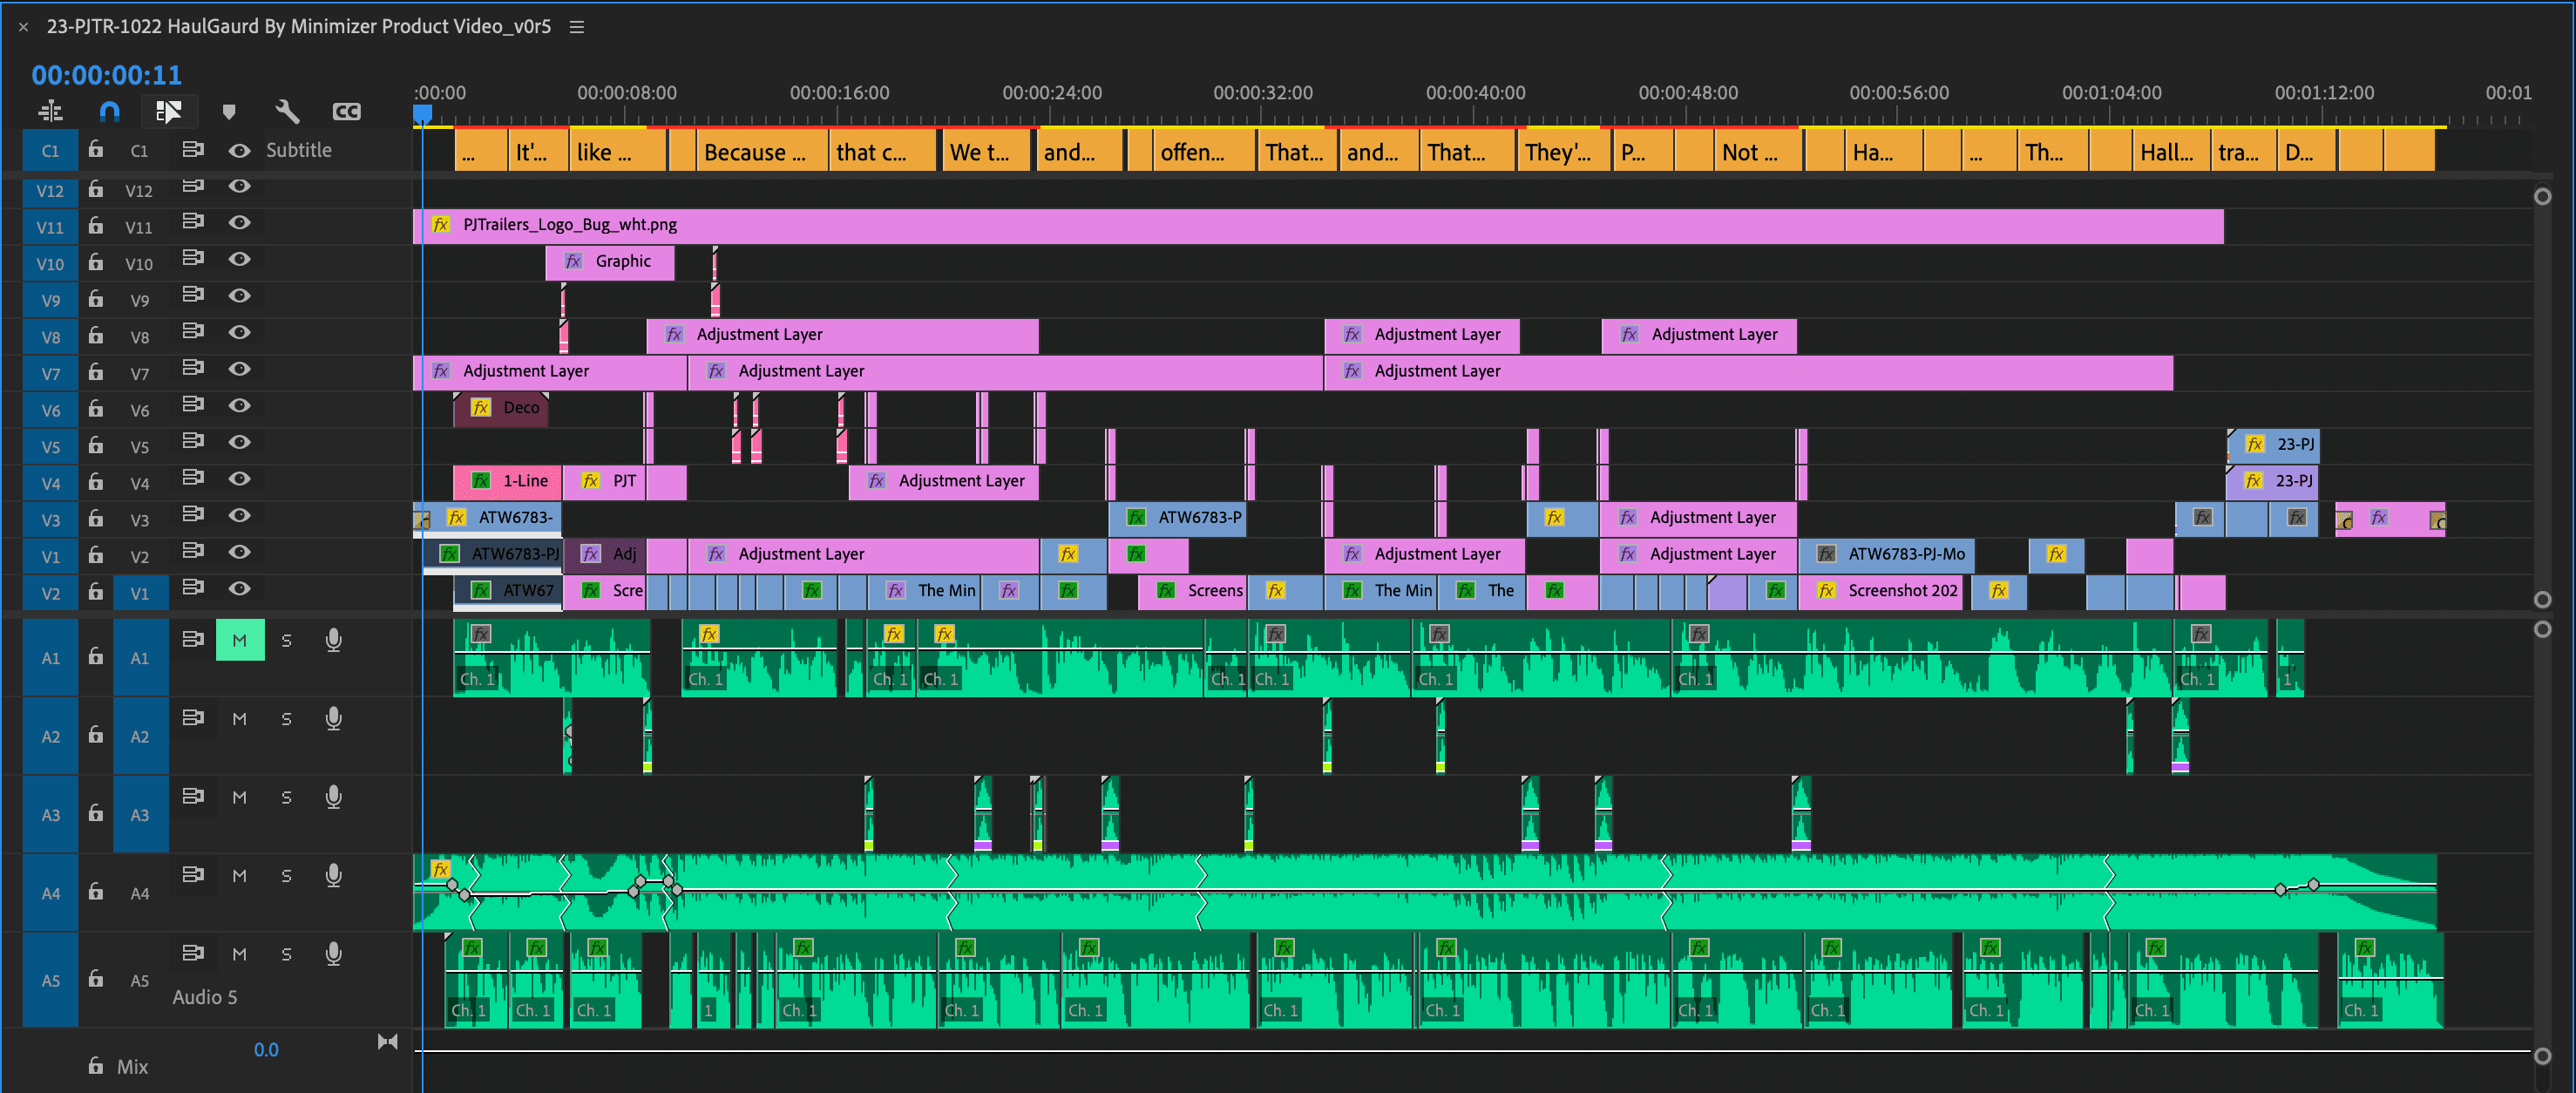 Typical video editing timeline